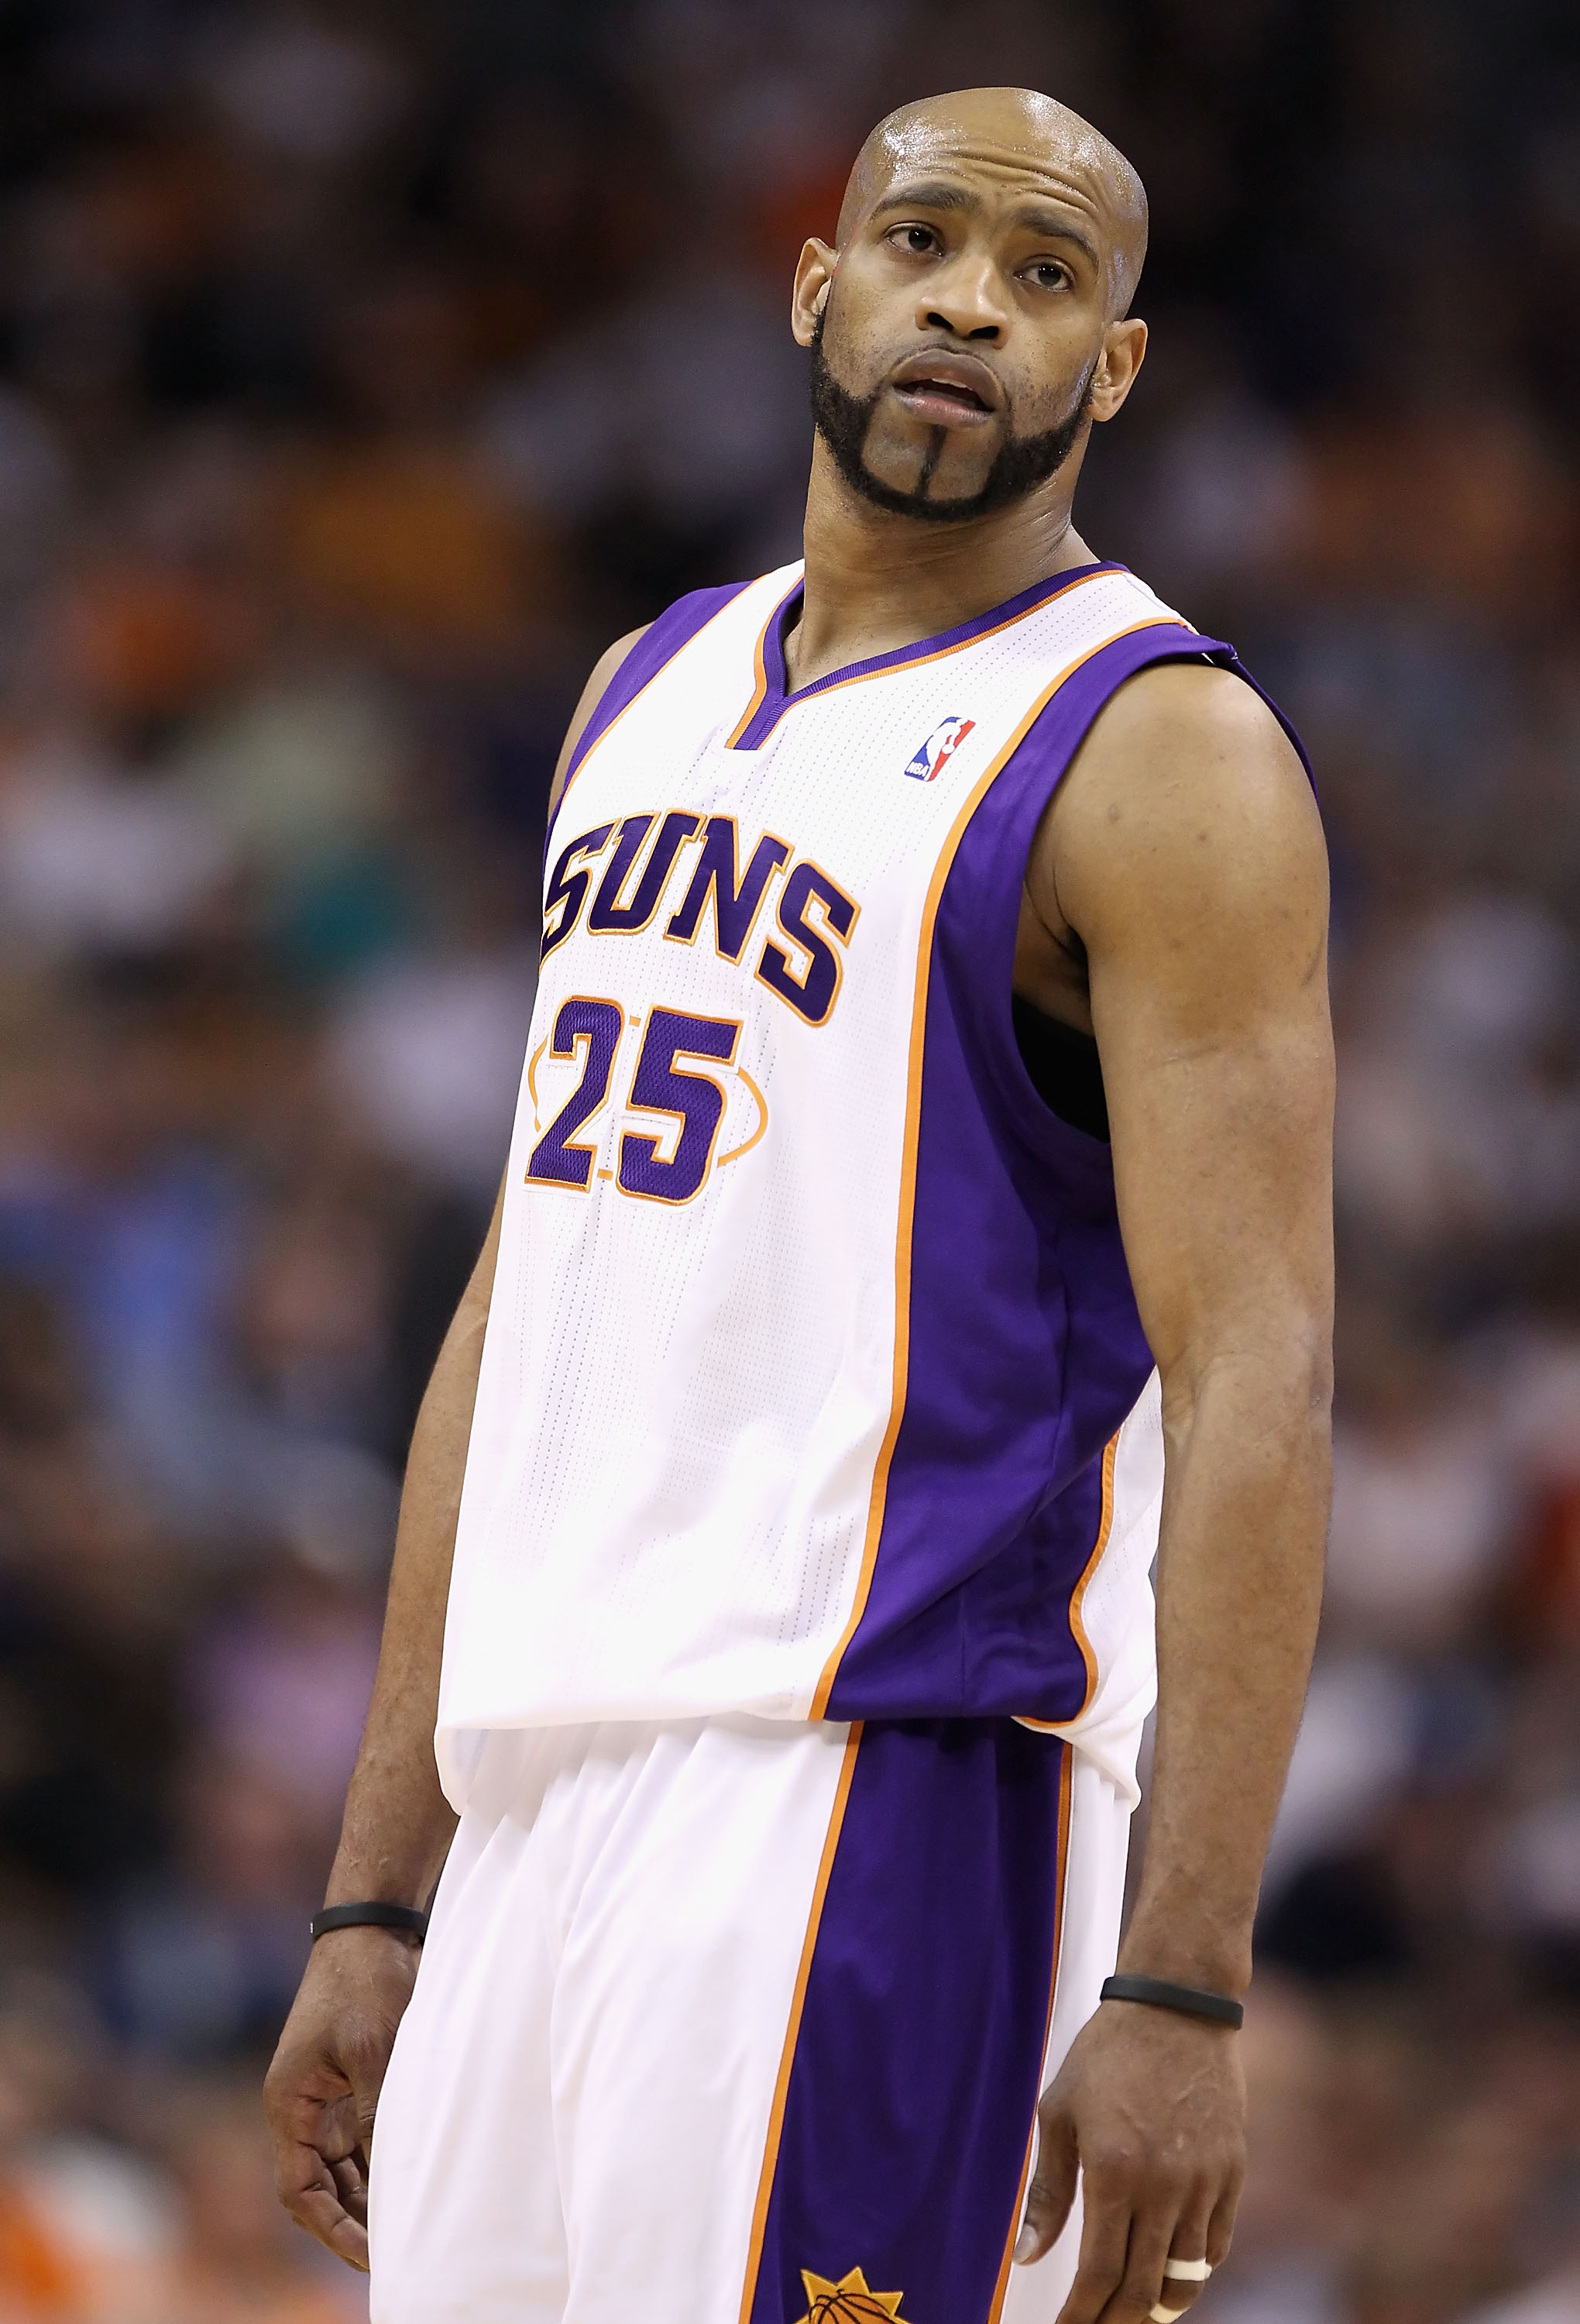 PHOENIX, AZ - MARCH 30:  Vince Carter #25 of the Phoenix Suns reacts during the NBA game against the Oklahoma City Thunder at US Airways Center on March 30, 2011 in Phoenix, Arizona.  The Thunder defeated the Suns 116-98. NOTE TO USER: User expressly ackn